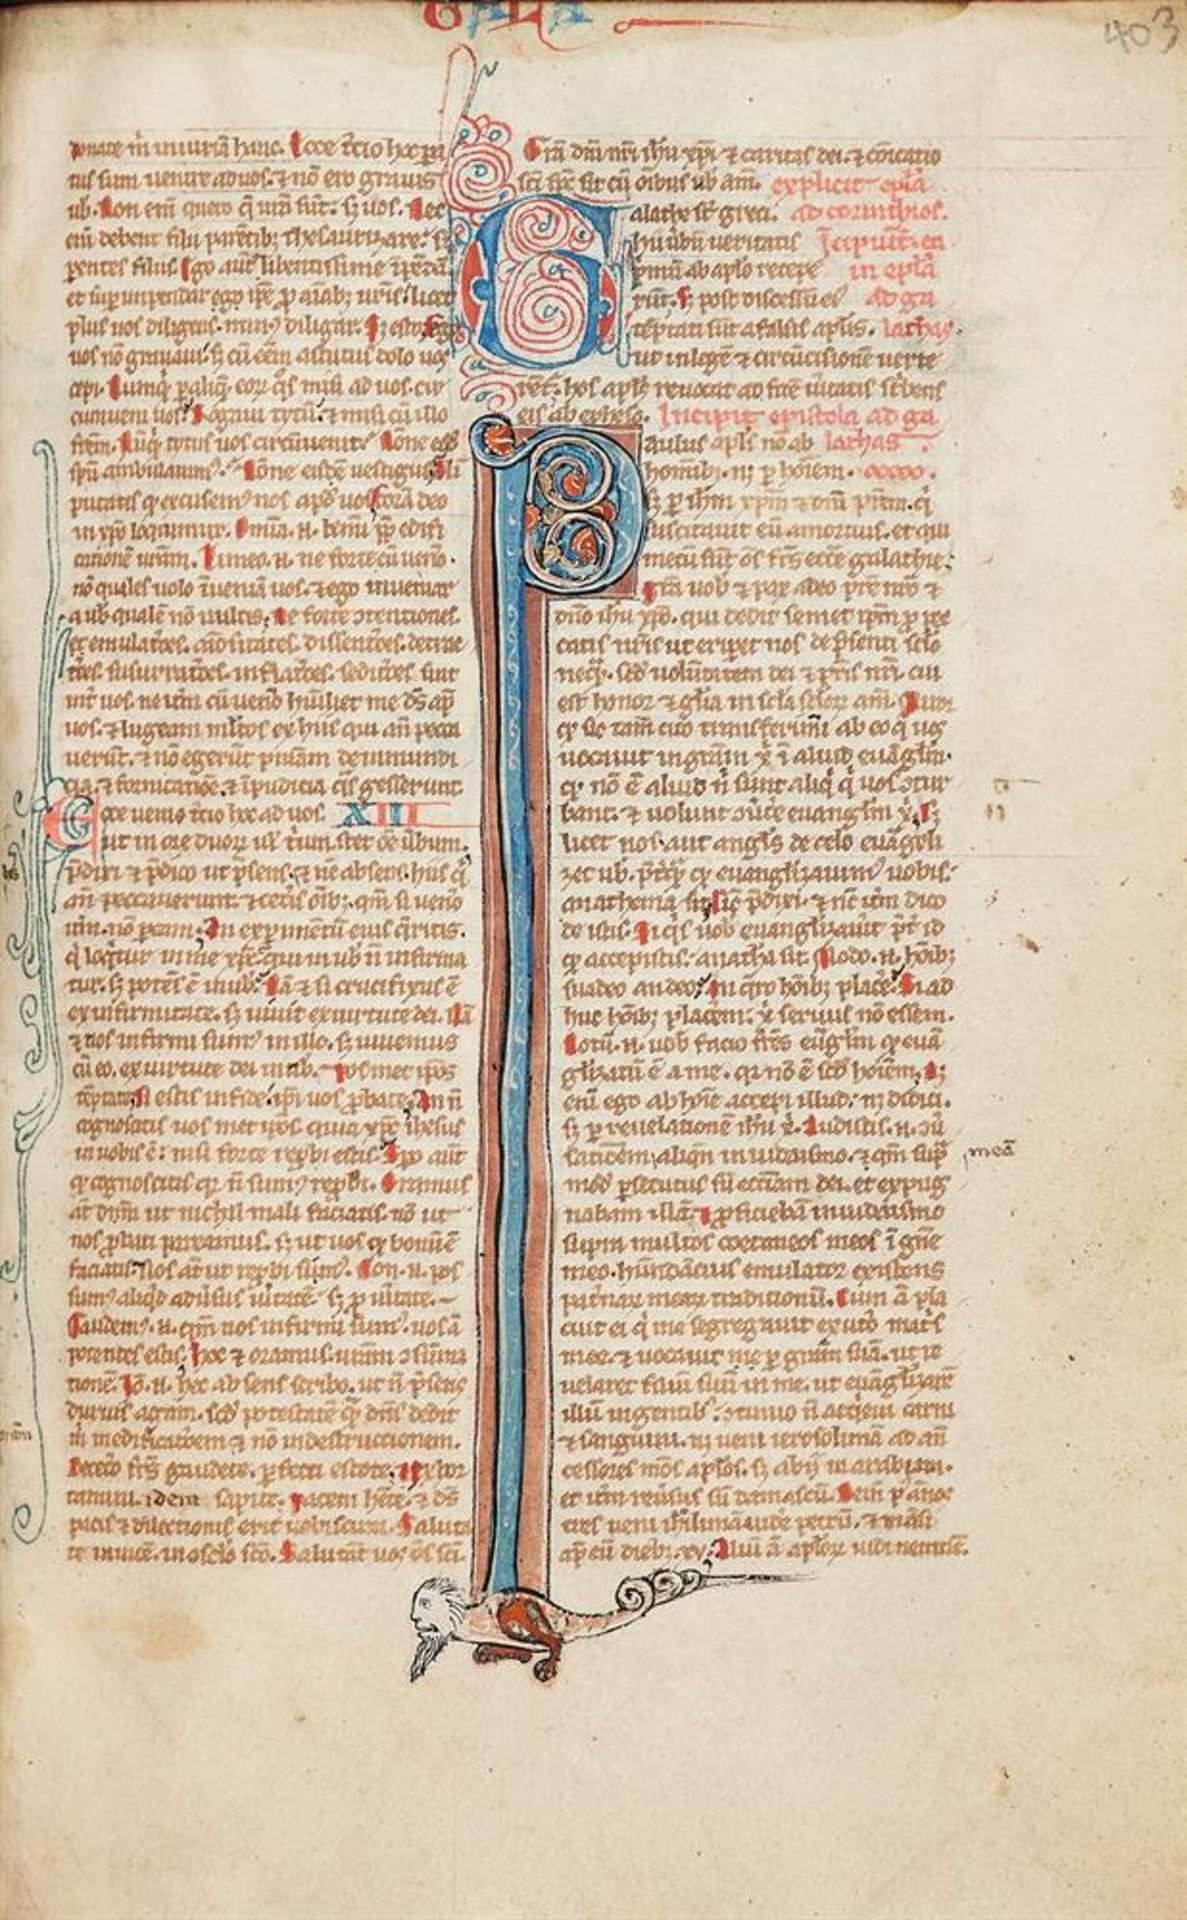 Ɵ The Bishop Carr Bible, in Latin, decorated manuscript on parchment - Image 9 of 10